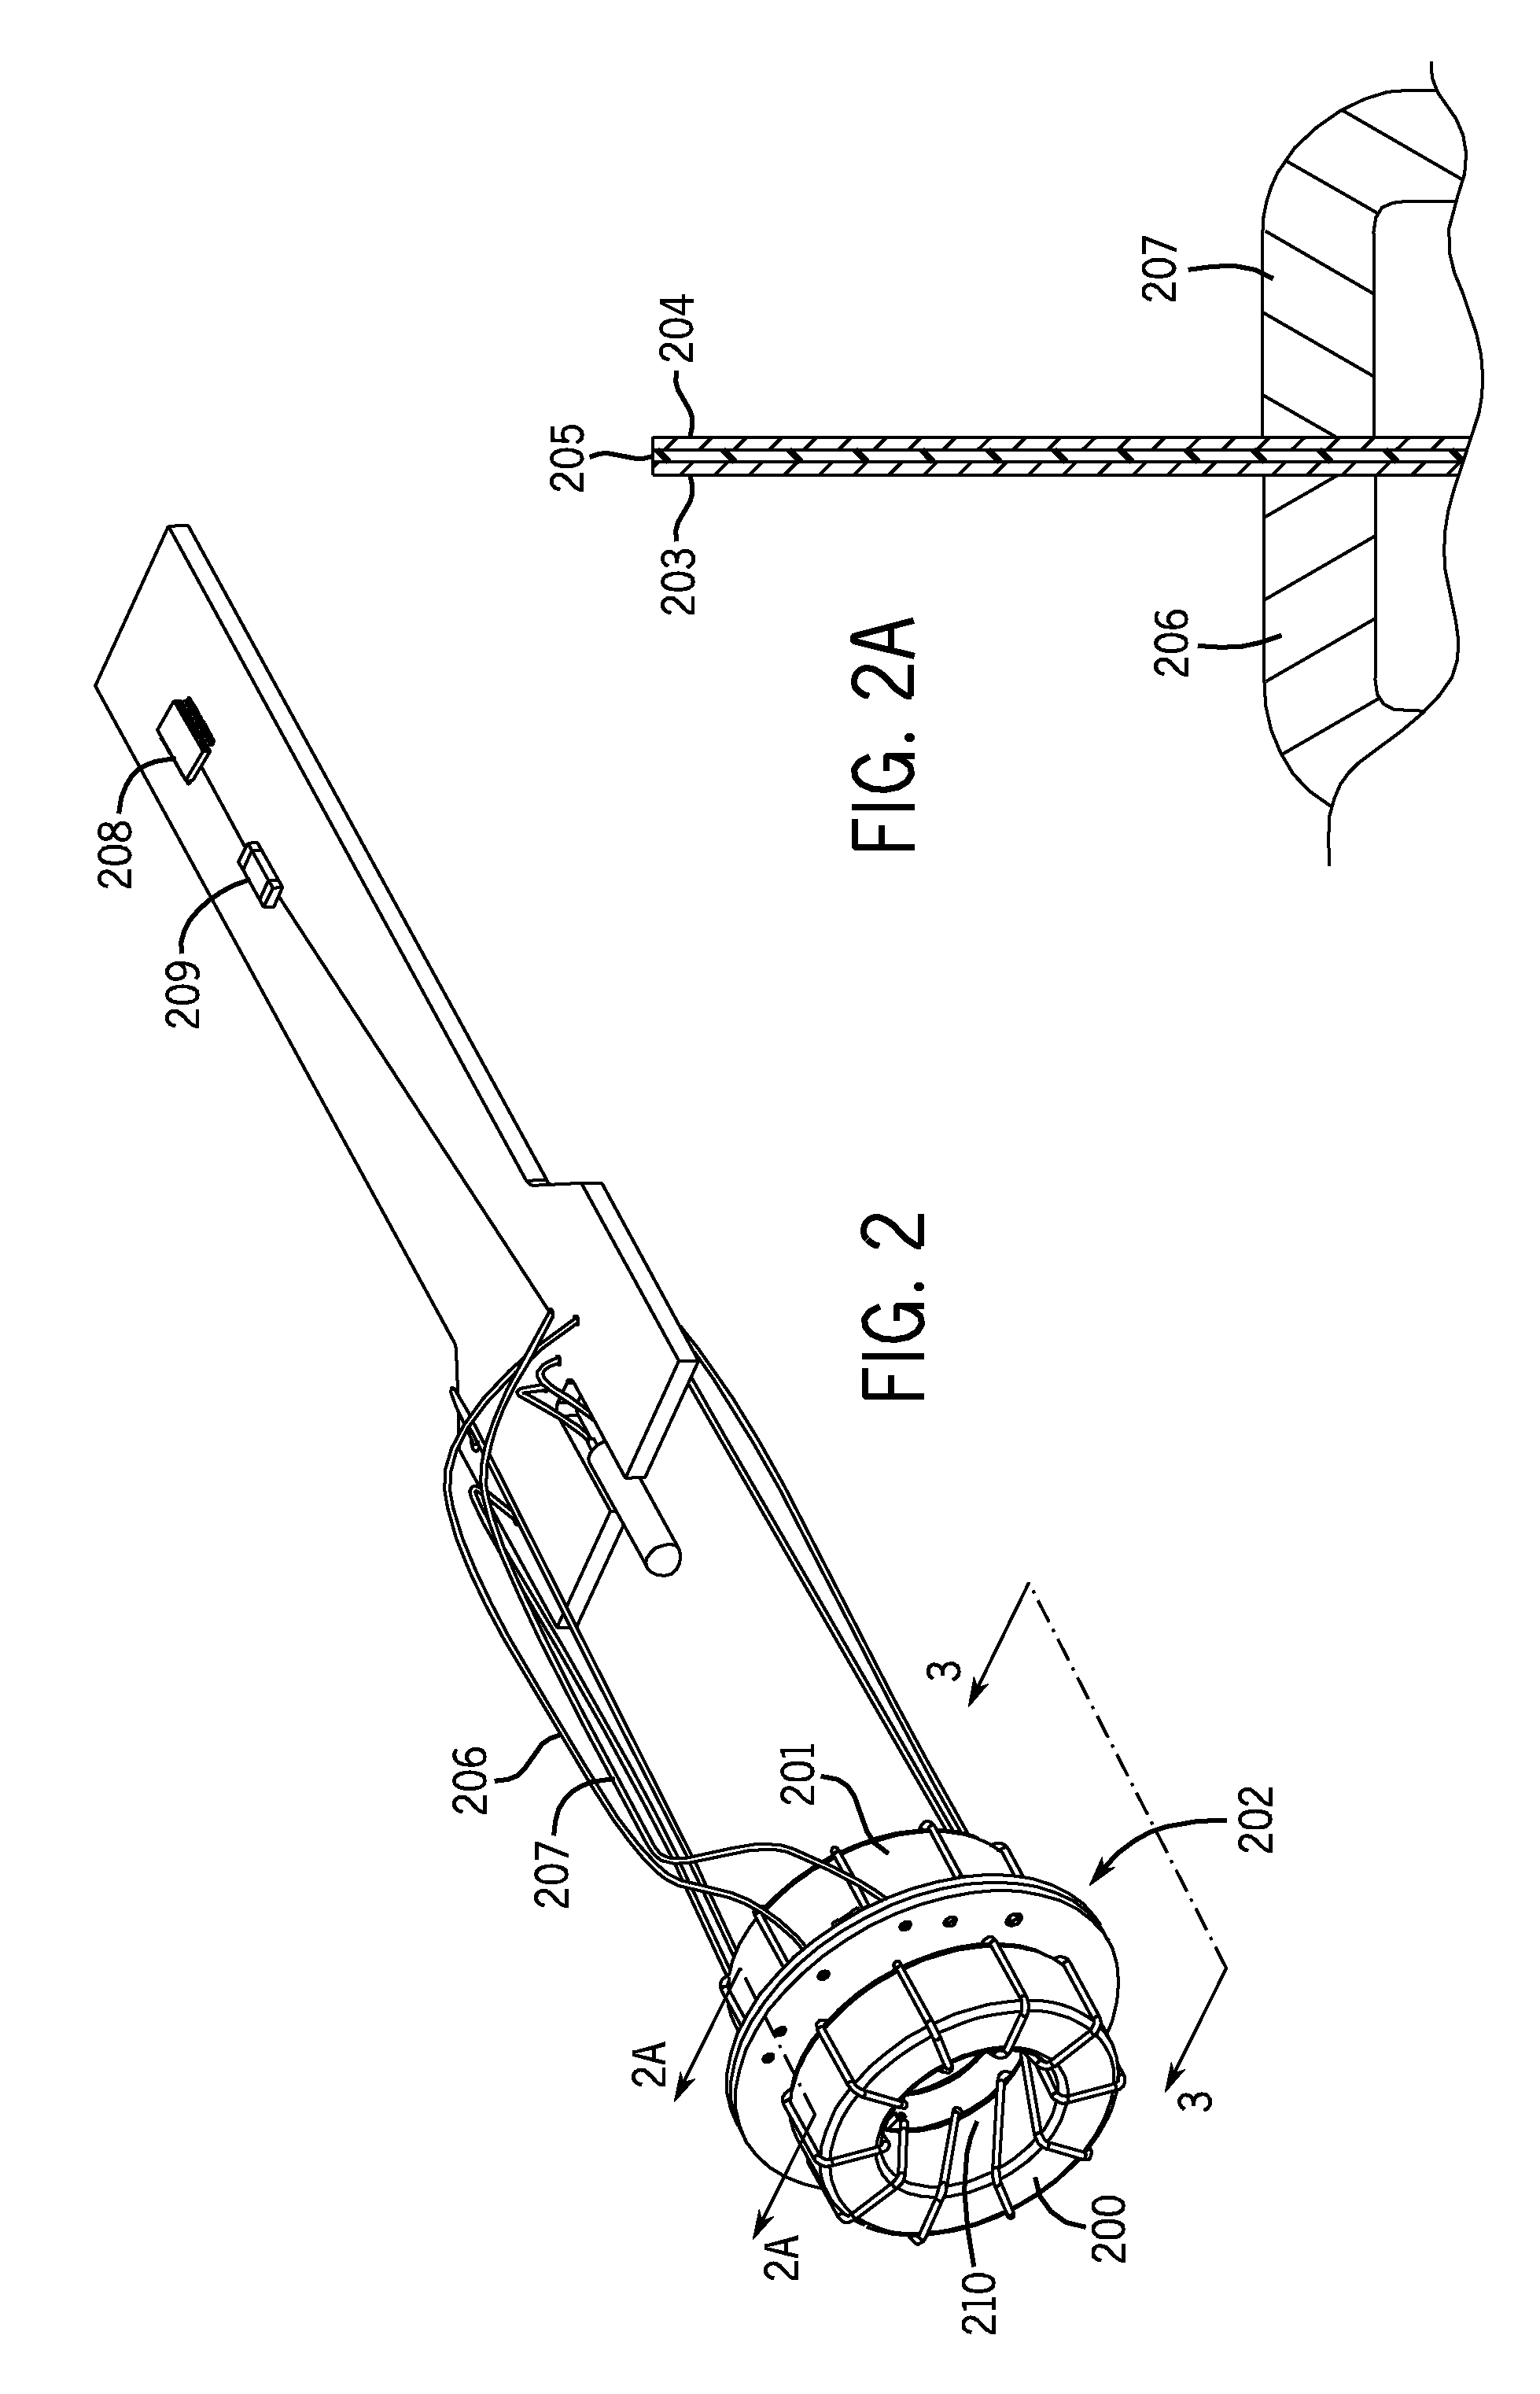 Toroidal conductivity probe with integrated circuitry